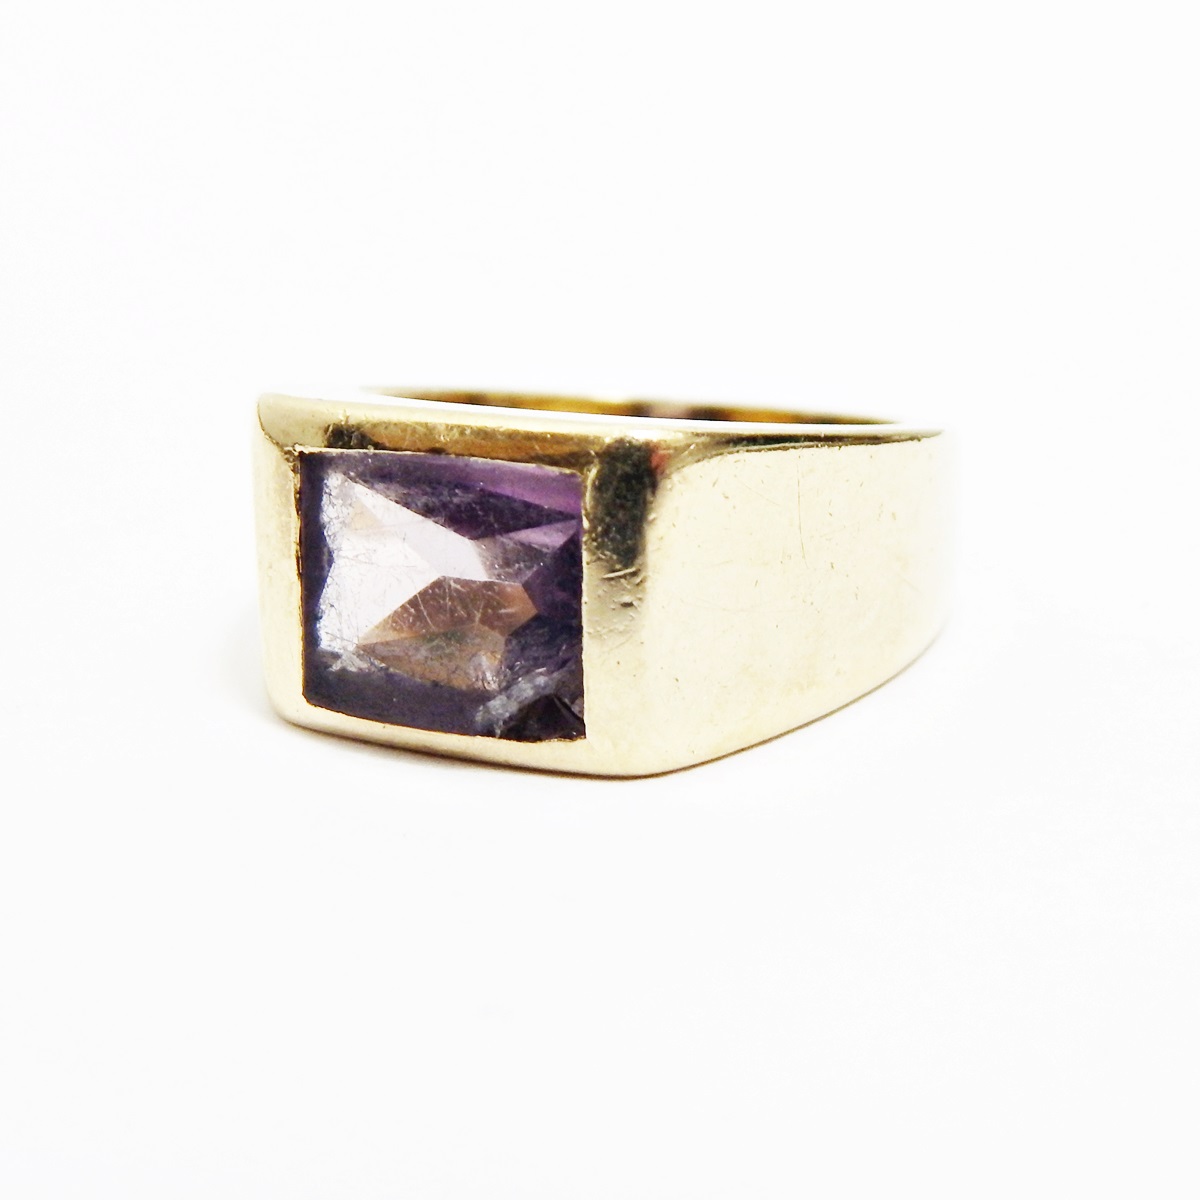 14K ring set with amethyst, rectangular, 12g approx.